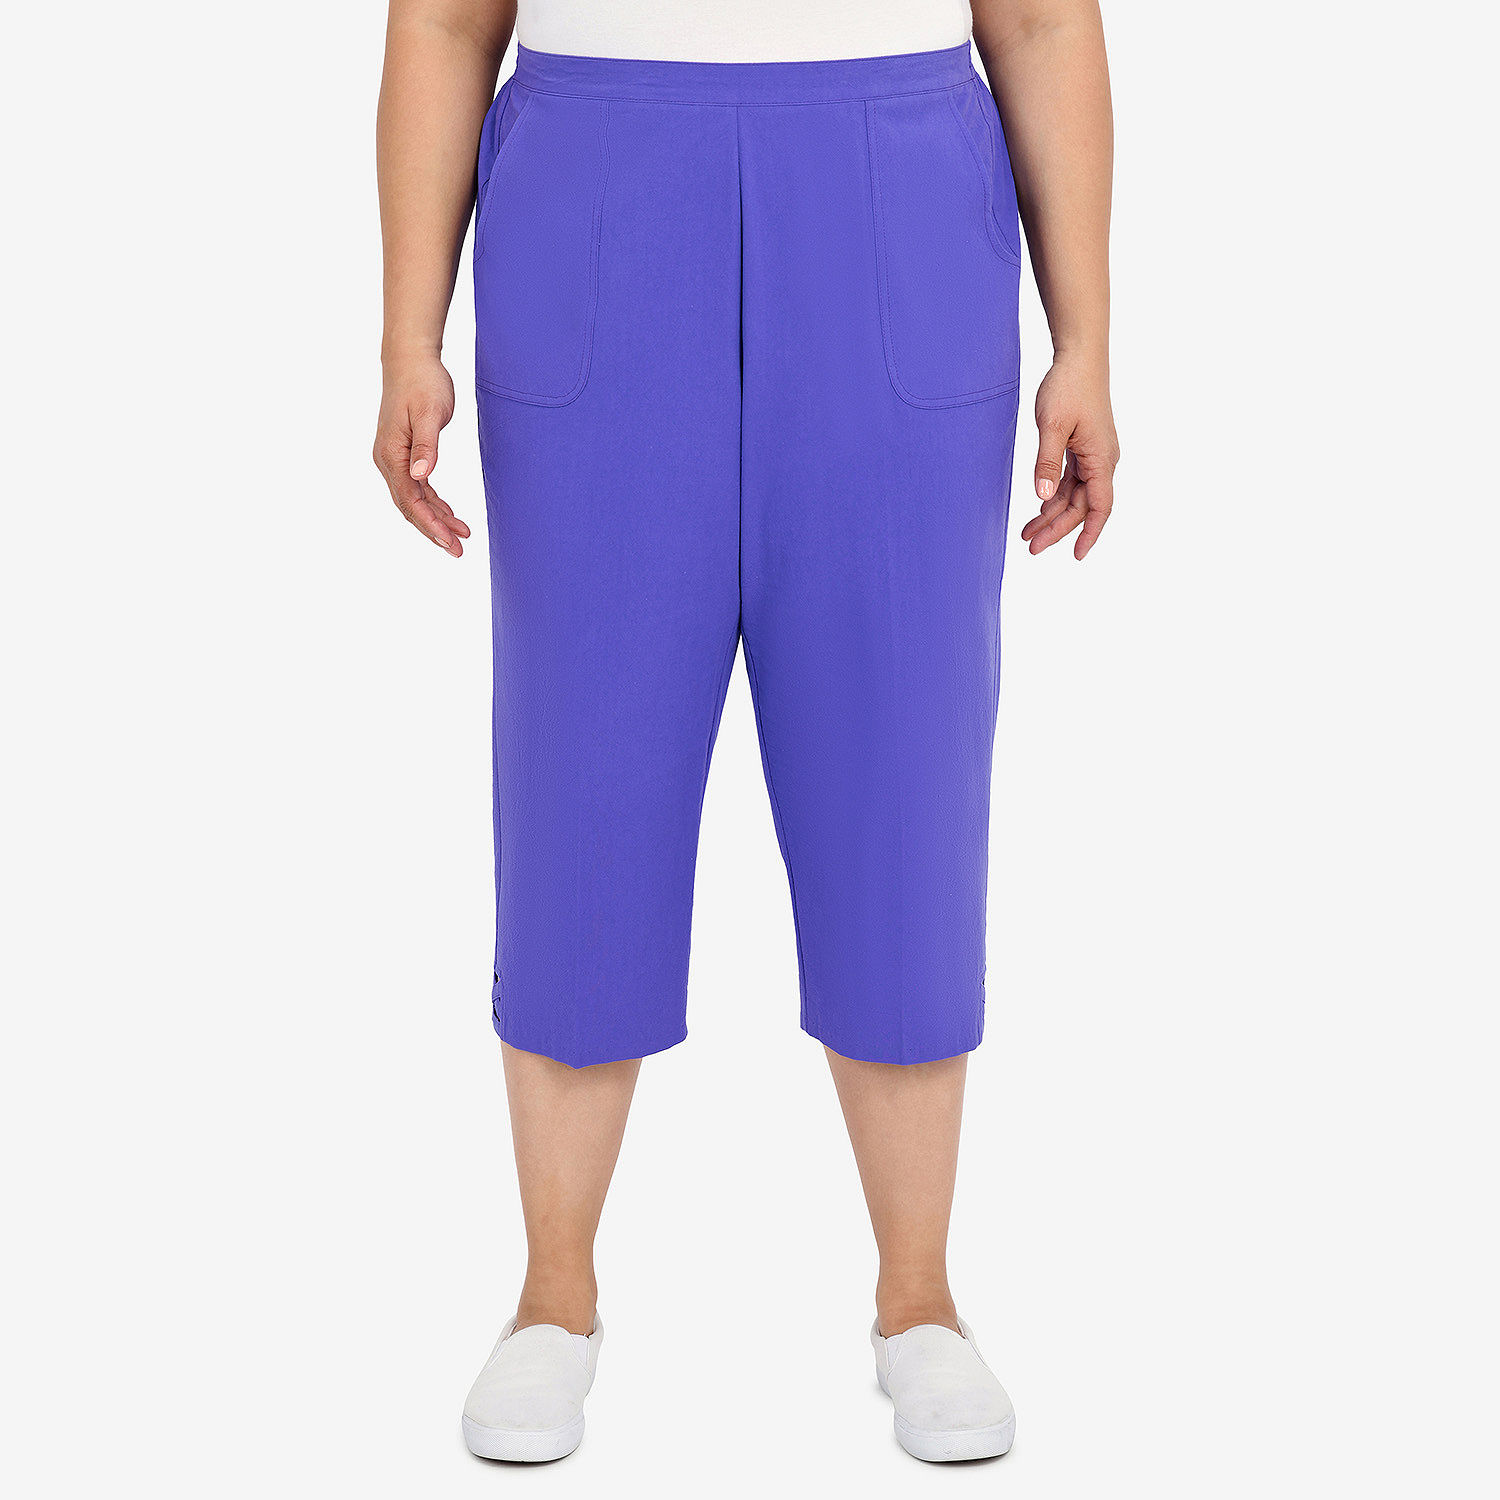 Alfred Dunner Tropic Zone Mid Rise Plus Capris - JCPenney